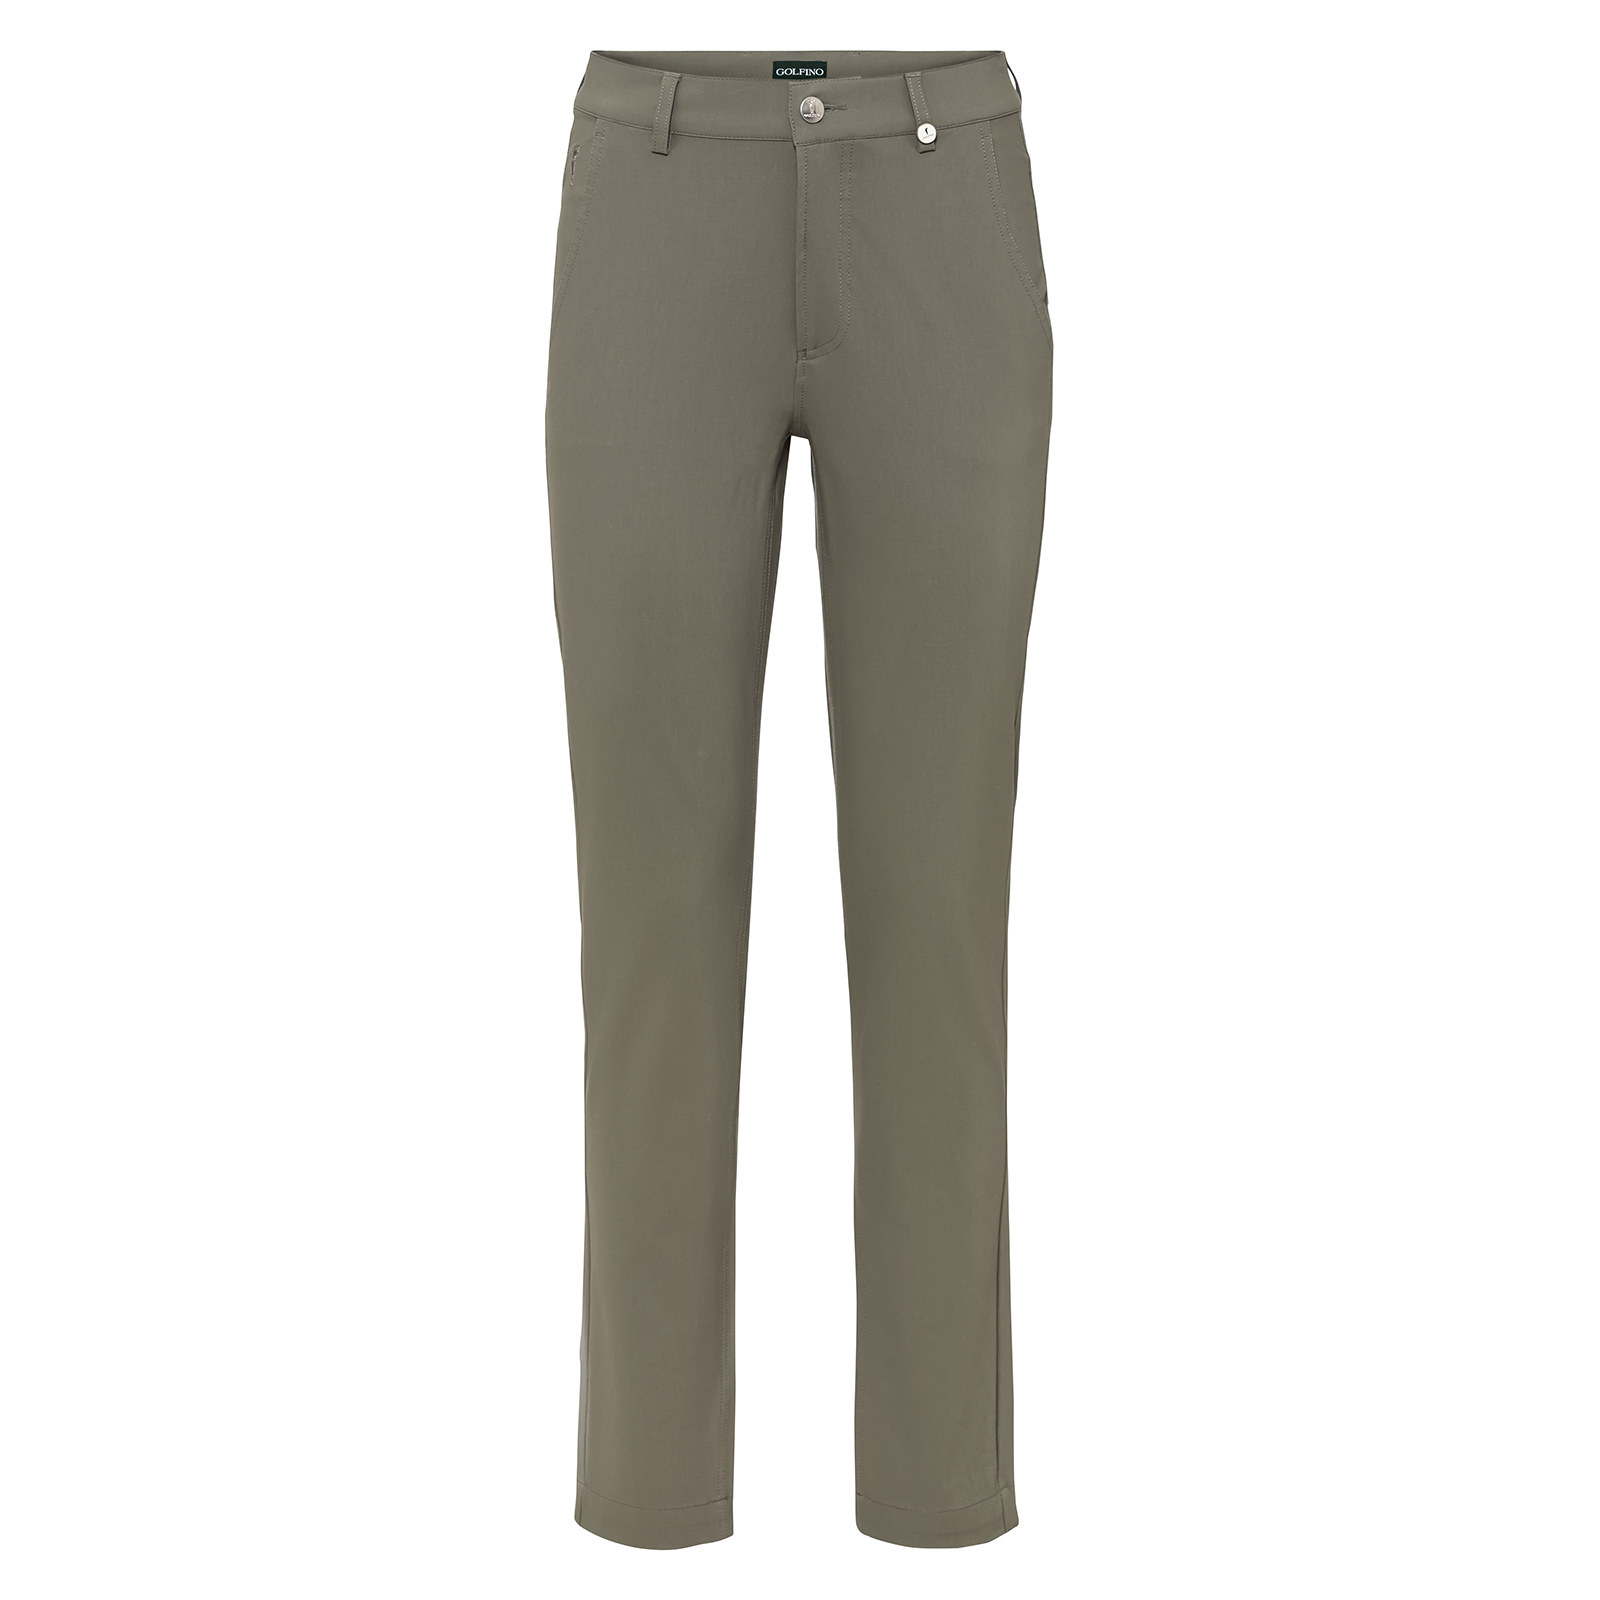 Comfortably wearable ladies' golf trousers in premium Techno Stretch 